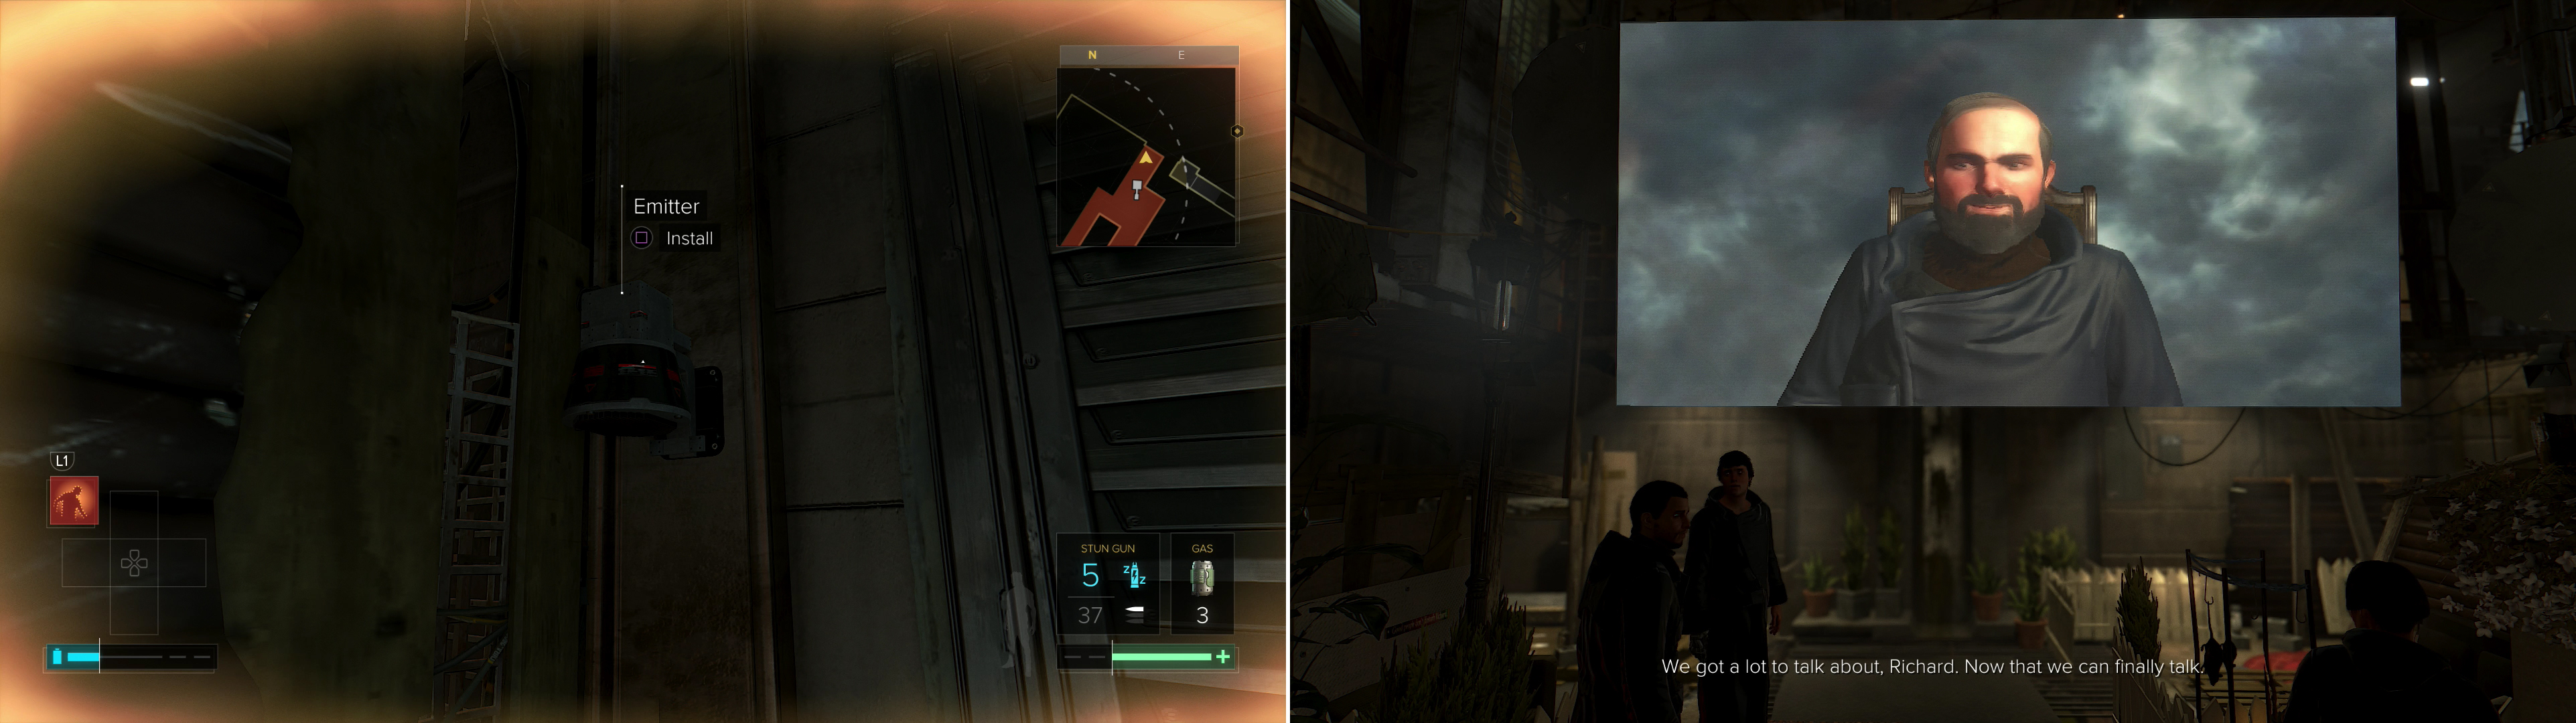 Plant the Scrambling Devices to neutralize Richard's Emitters (left) then, with your faculties restored, confront Richard in a war of words (right).